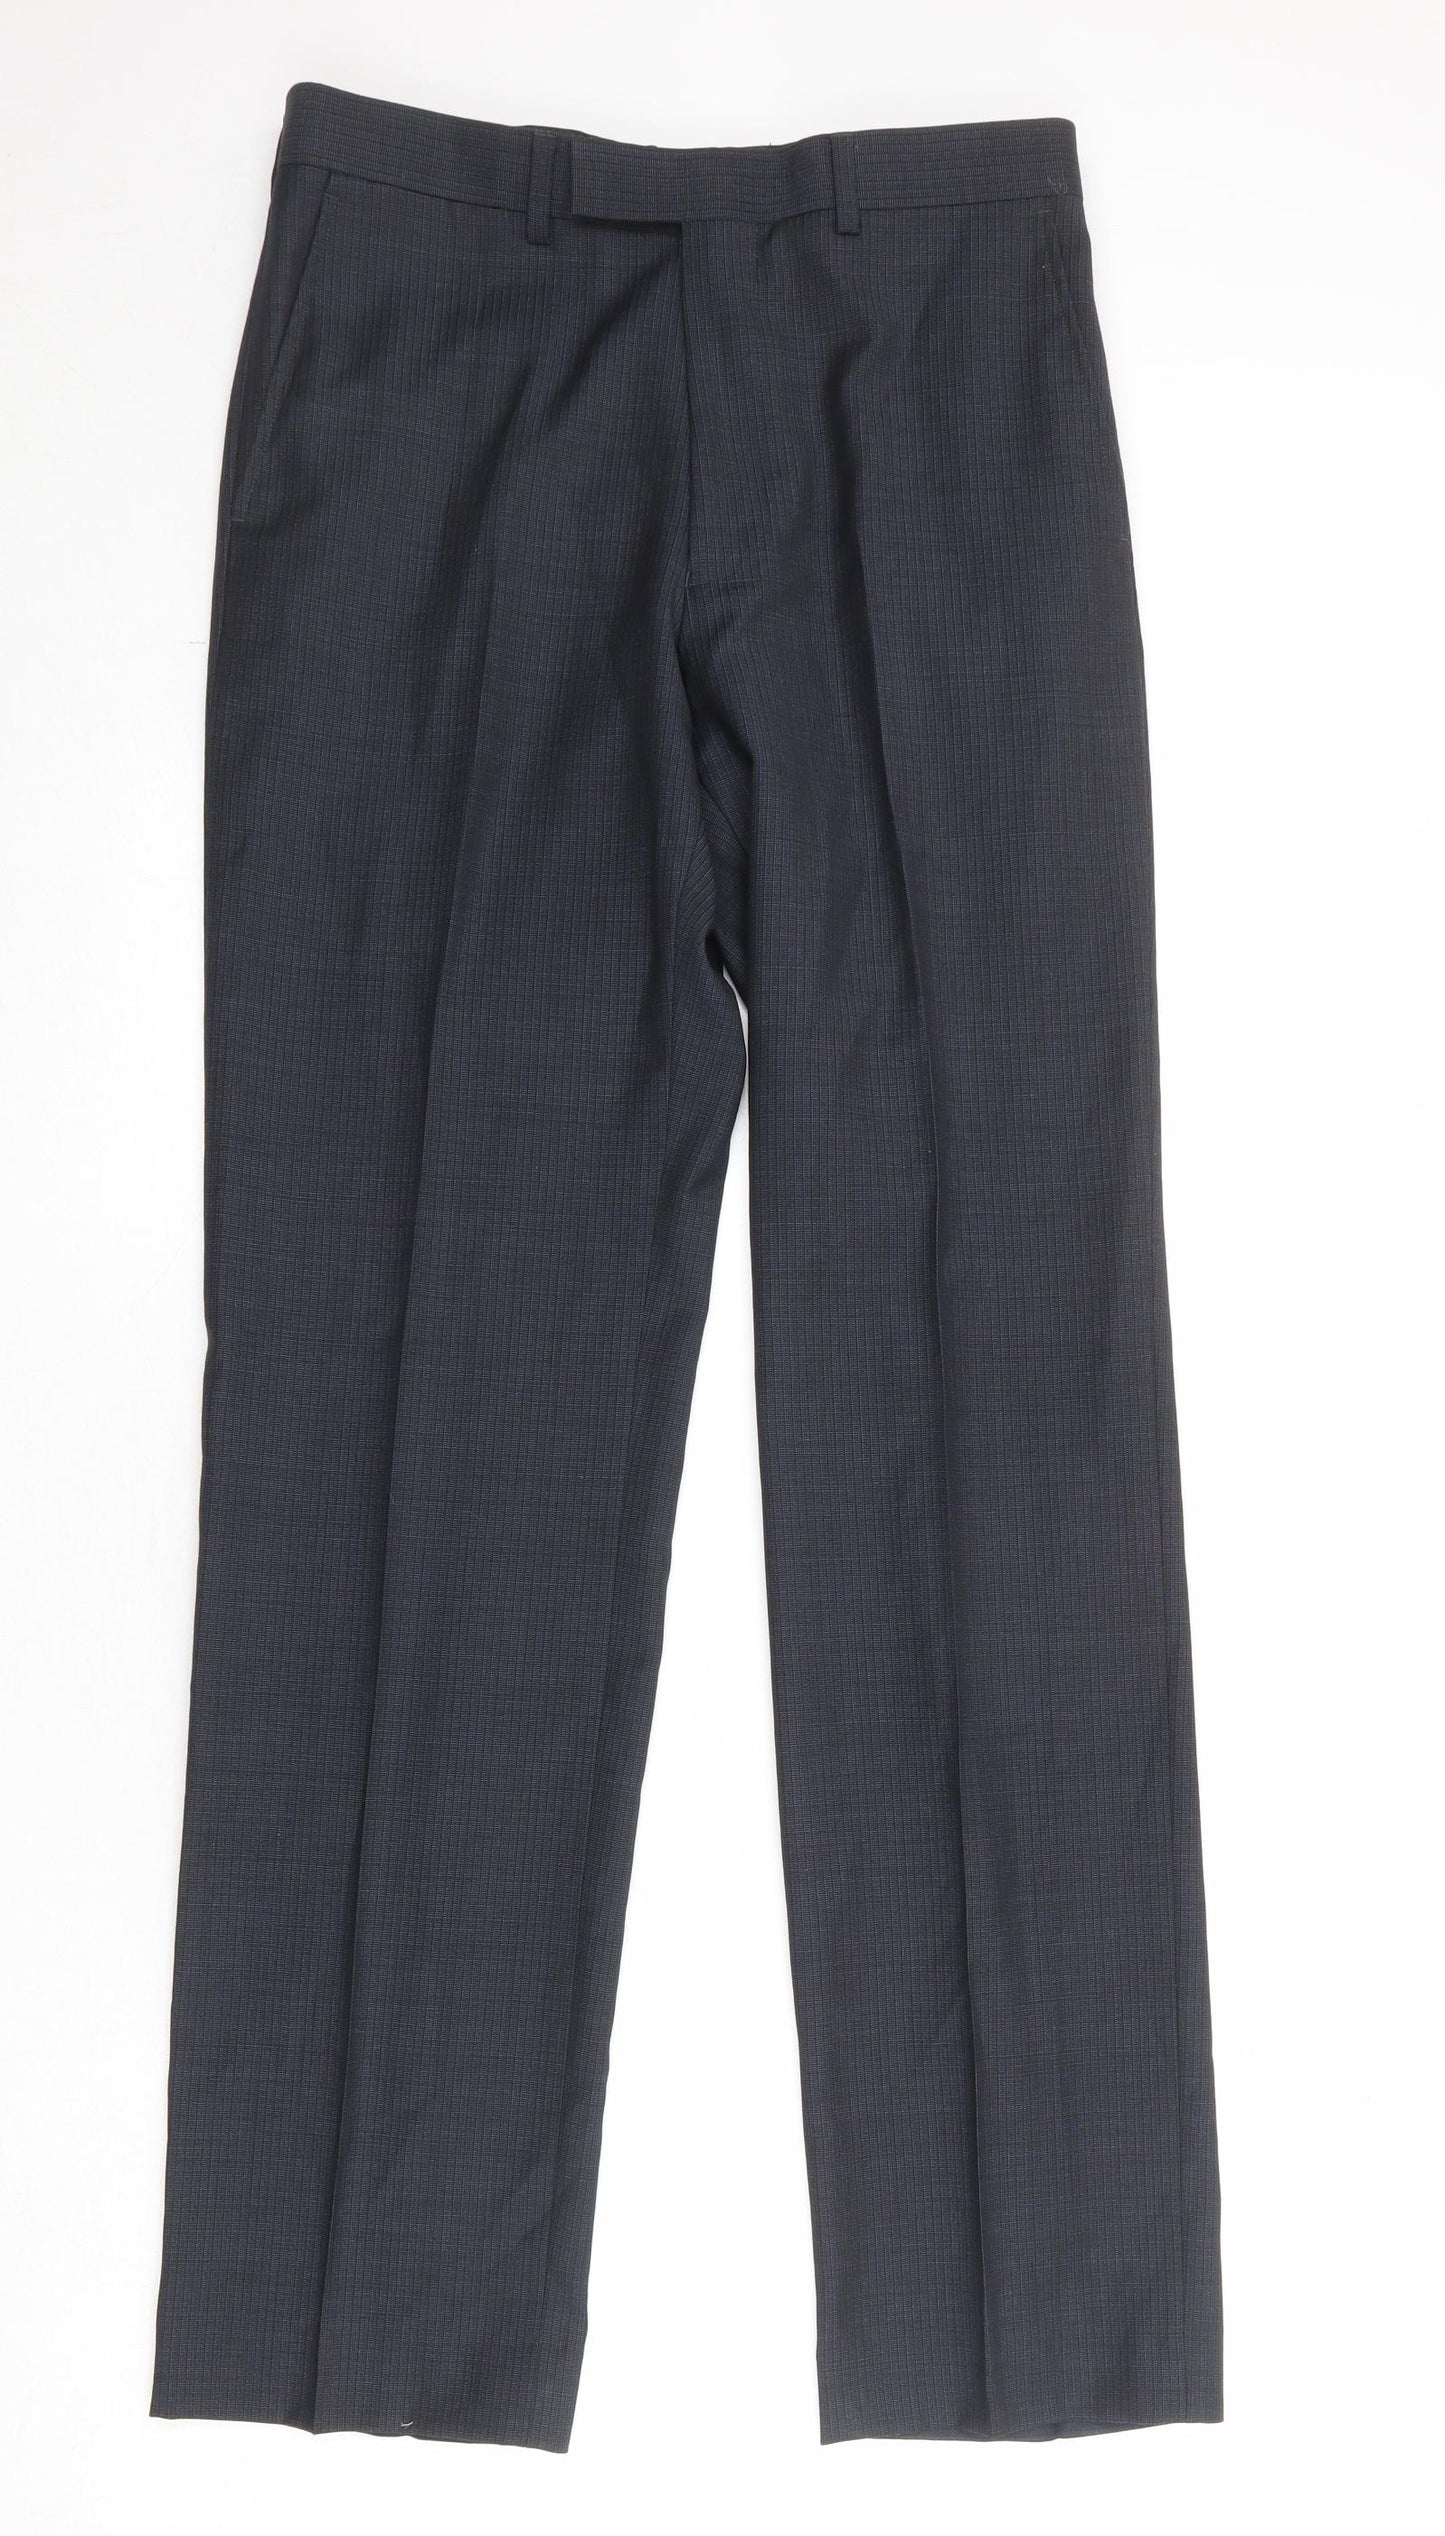 Marks and Spencer Mens Grey Wool Dress Pants Trousers Size 30 in Regular Zip